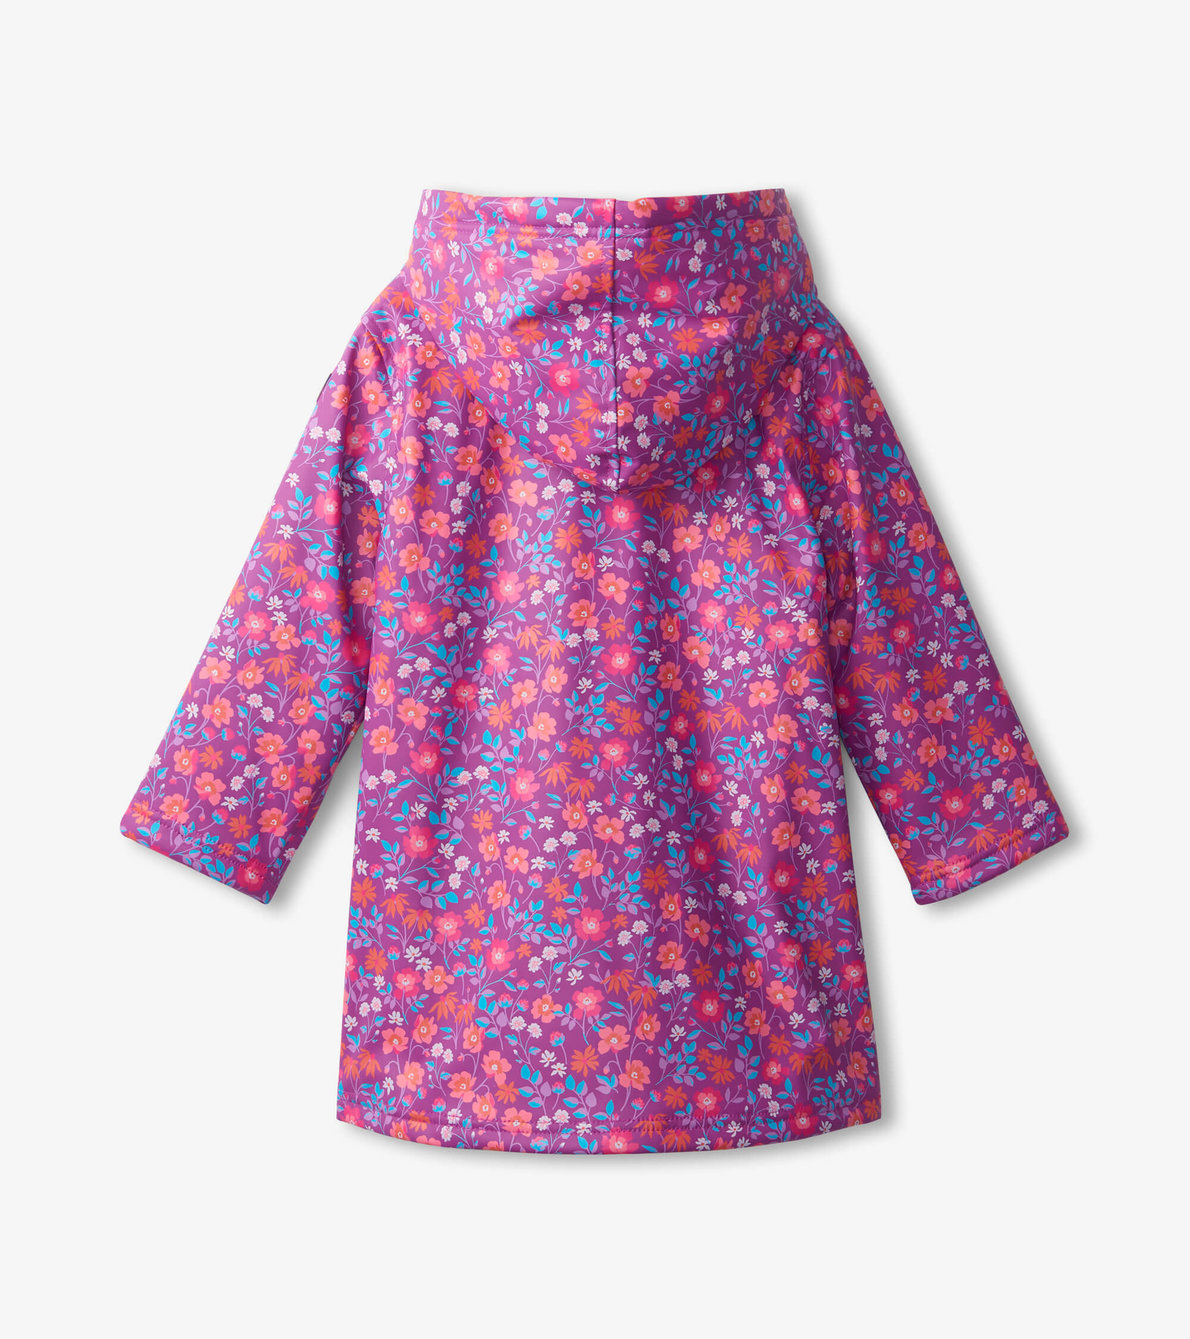 View larger image of Girls Wild Flowers Sherpa Lined Button-Up Rain Jacket